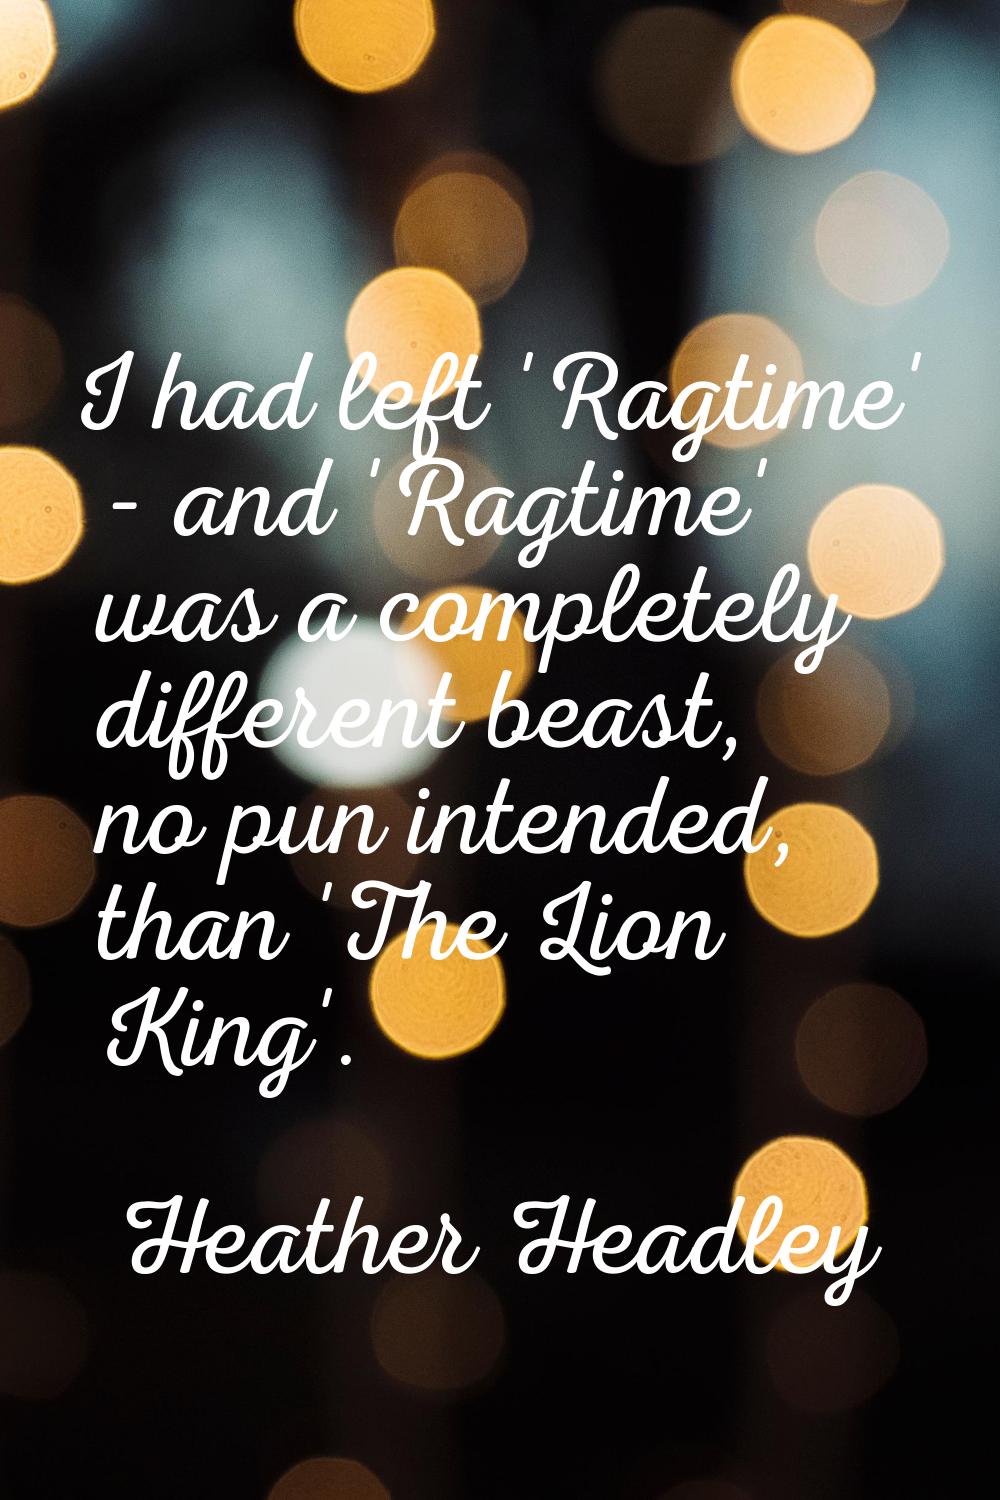 I had left 'Ragtime' - and 'Ragtime' was a completely different beast, no pun intended, than 'The L